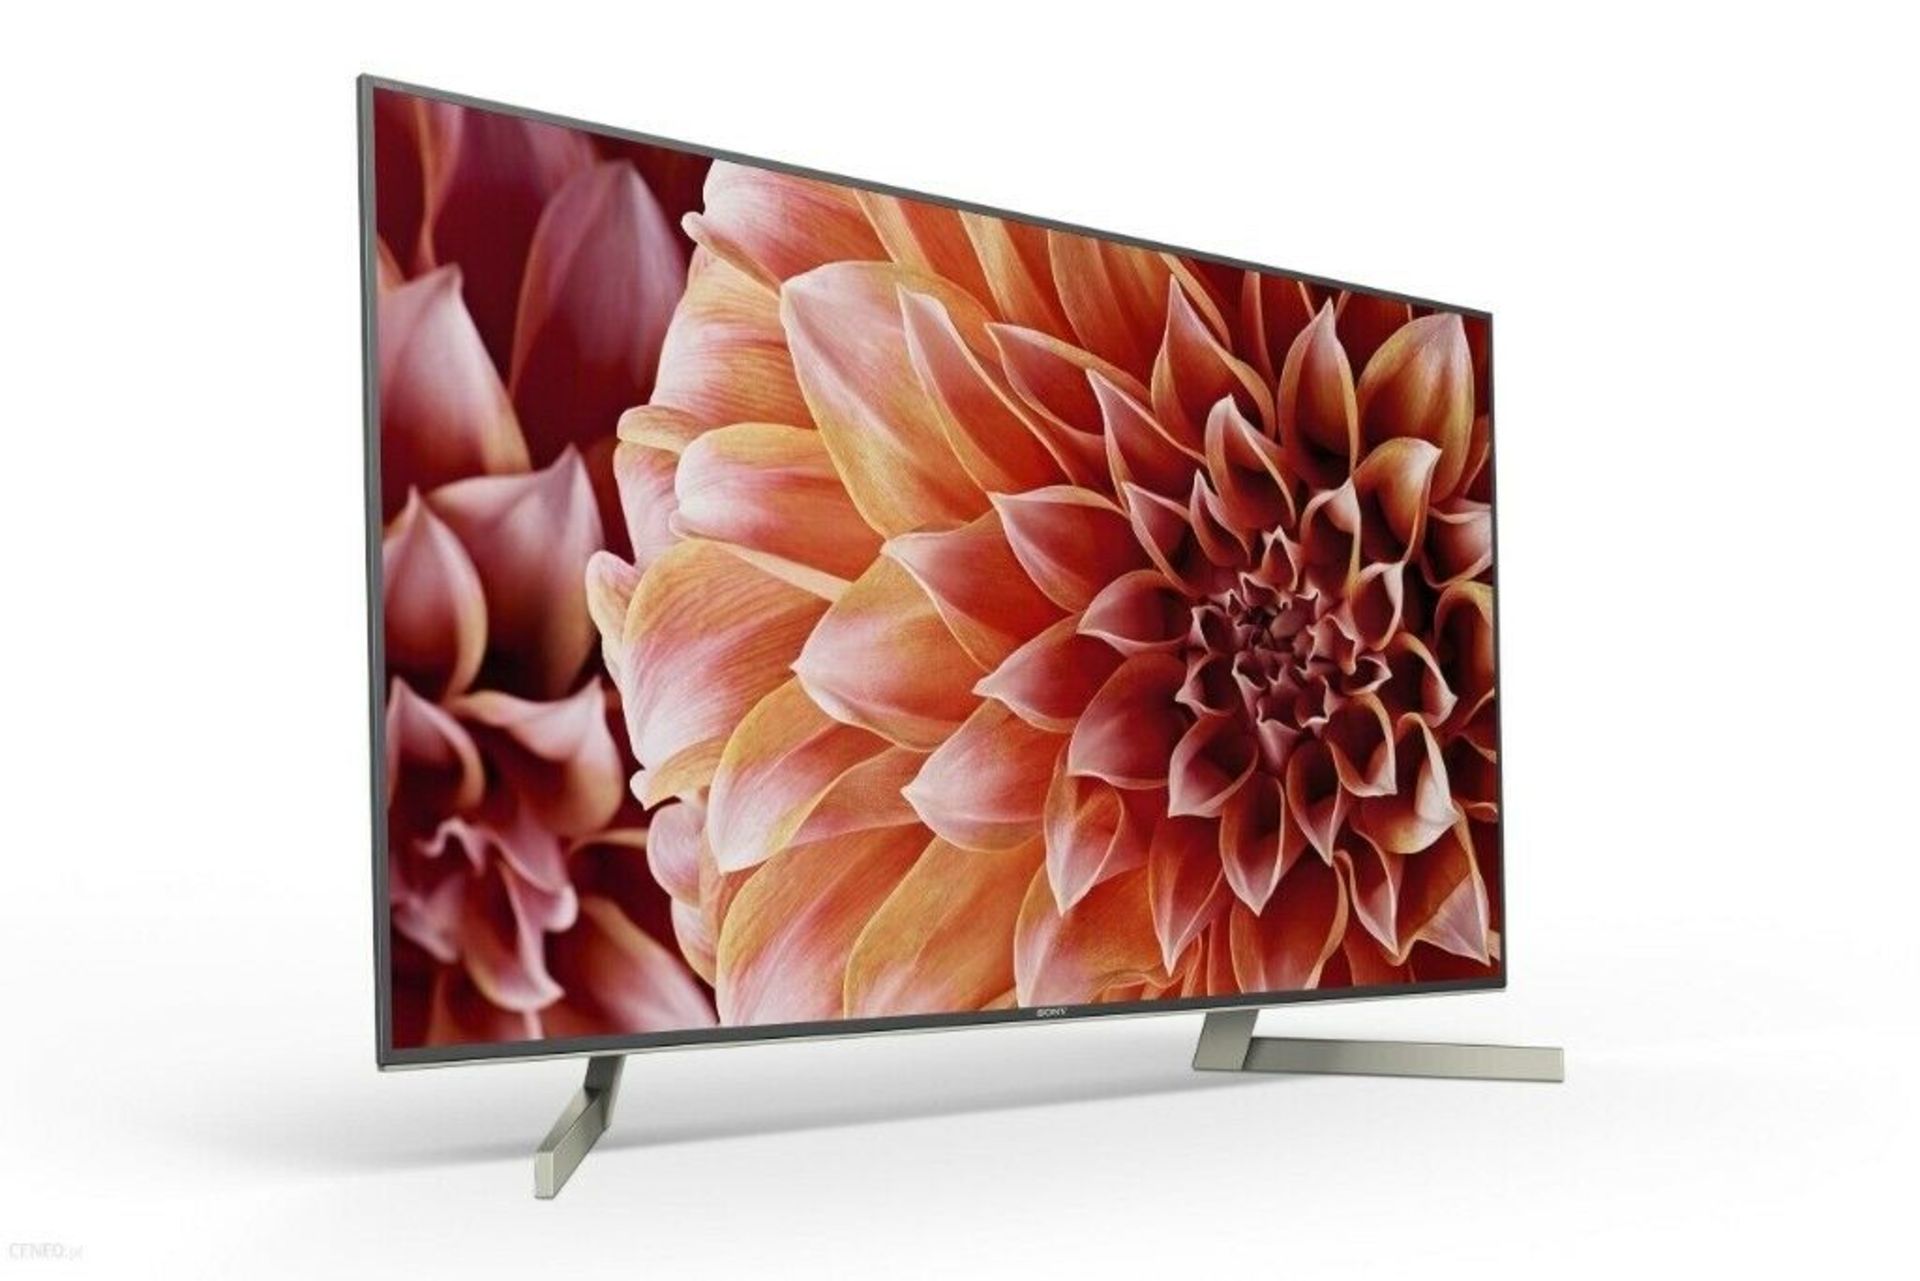 1 BOXED SONY BRAVIA 55" KD-55XF9005 4K ULTRA HD LED SMART TV WITH STAND & REMOTE RRP Â£949.99 (